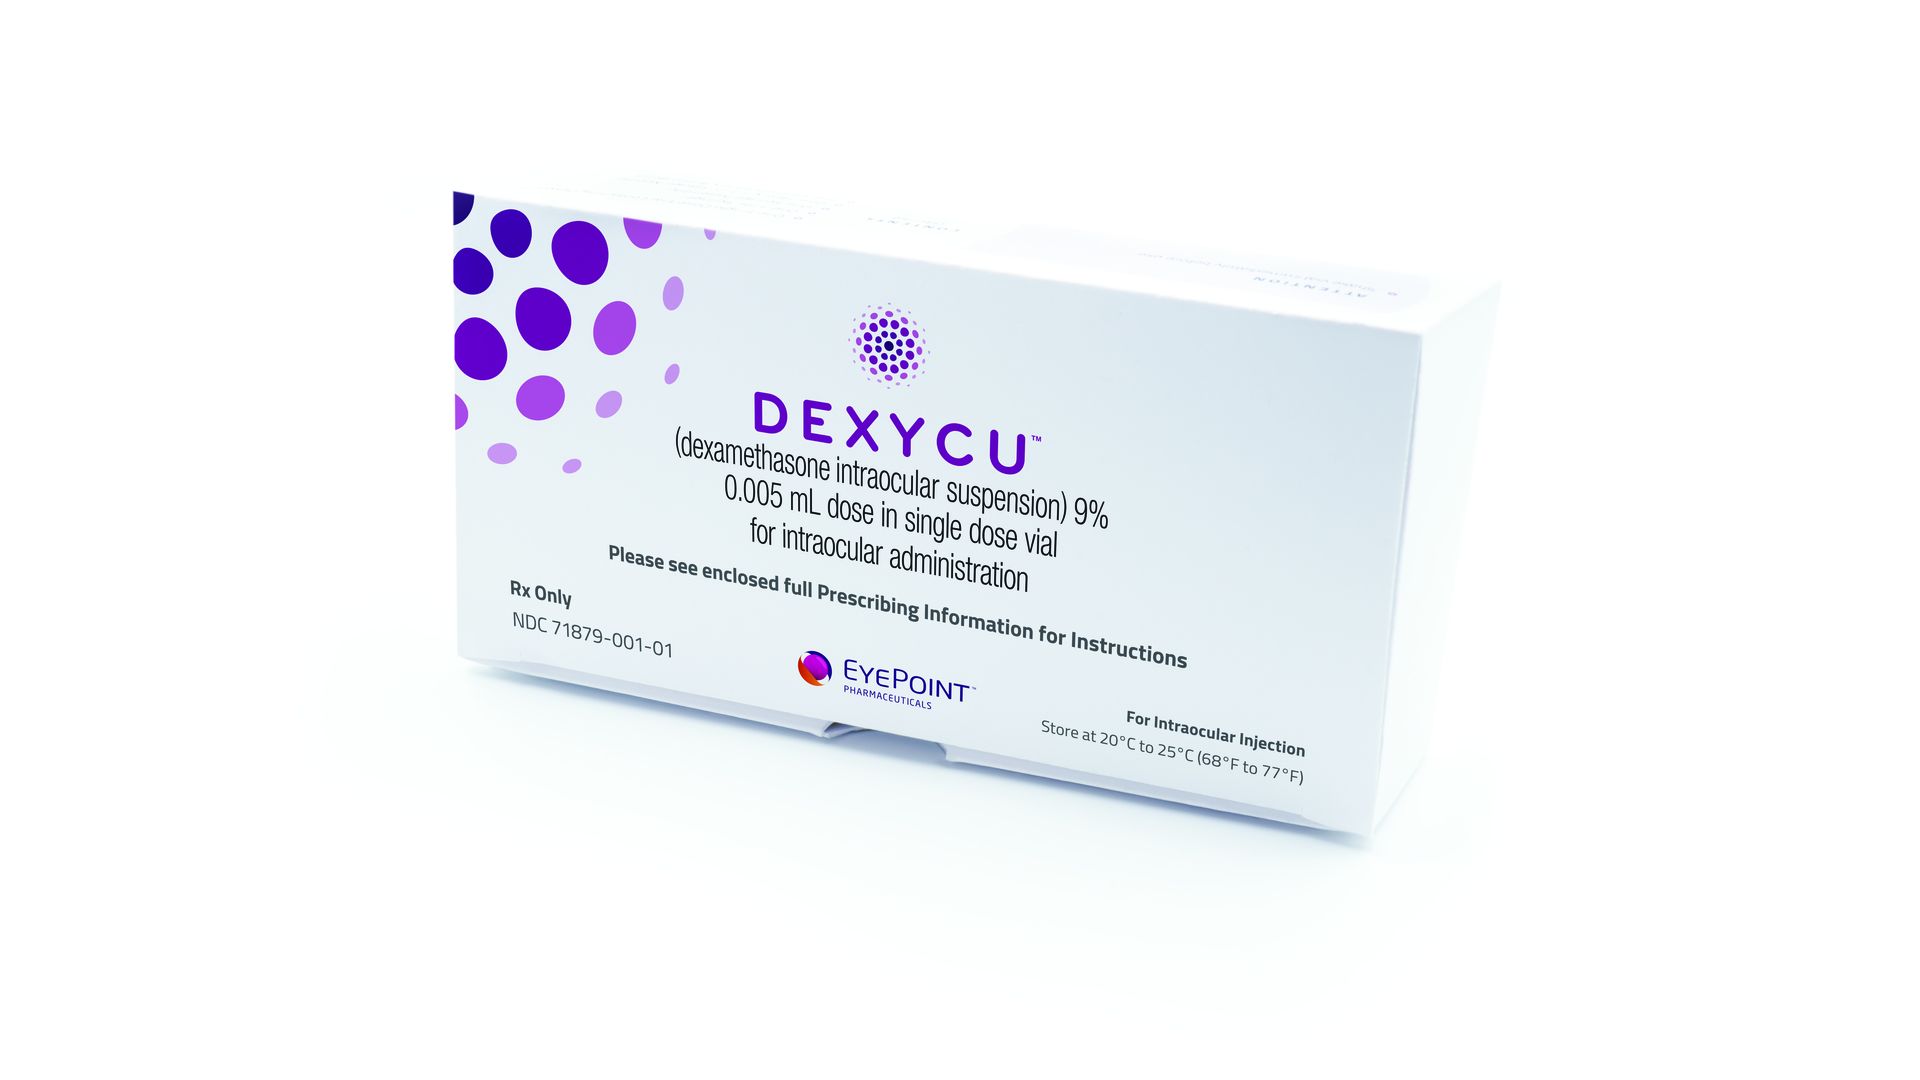 A white box with the drug's name, Dexycu, on the front.